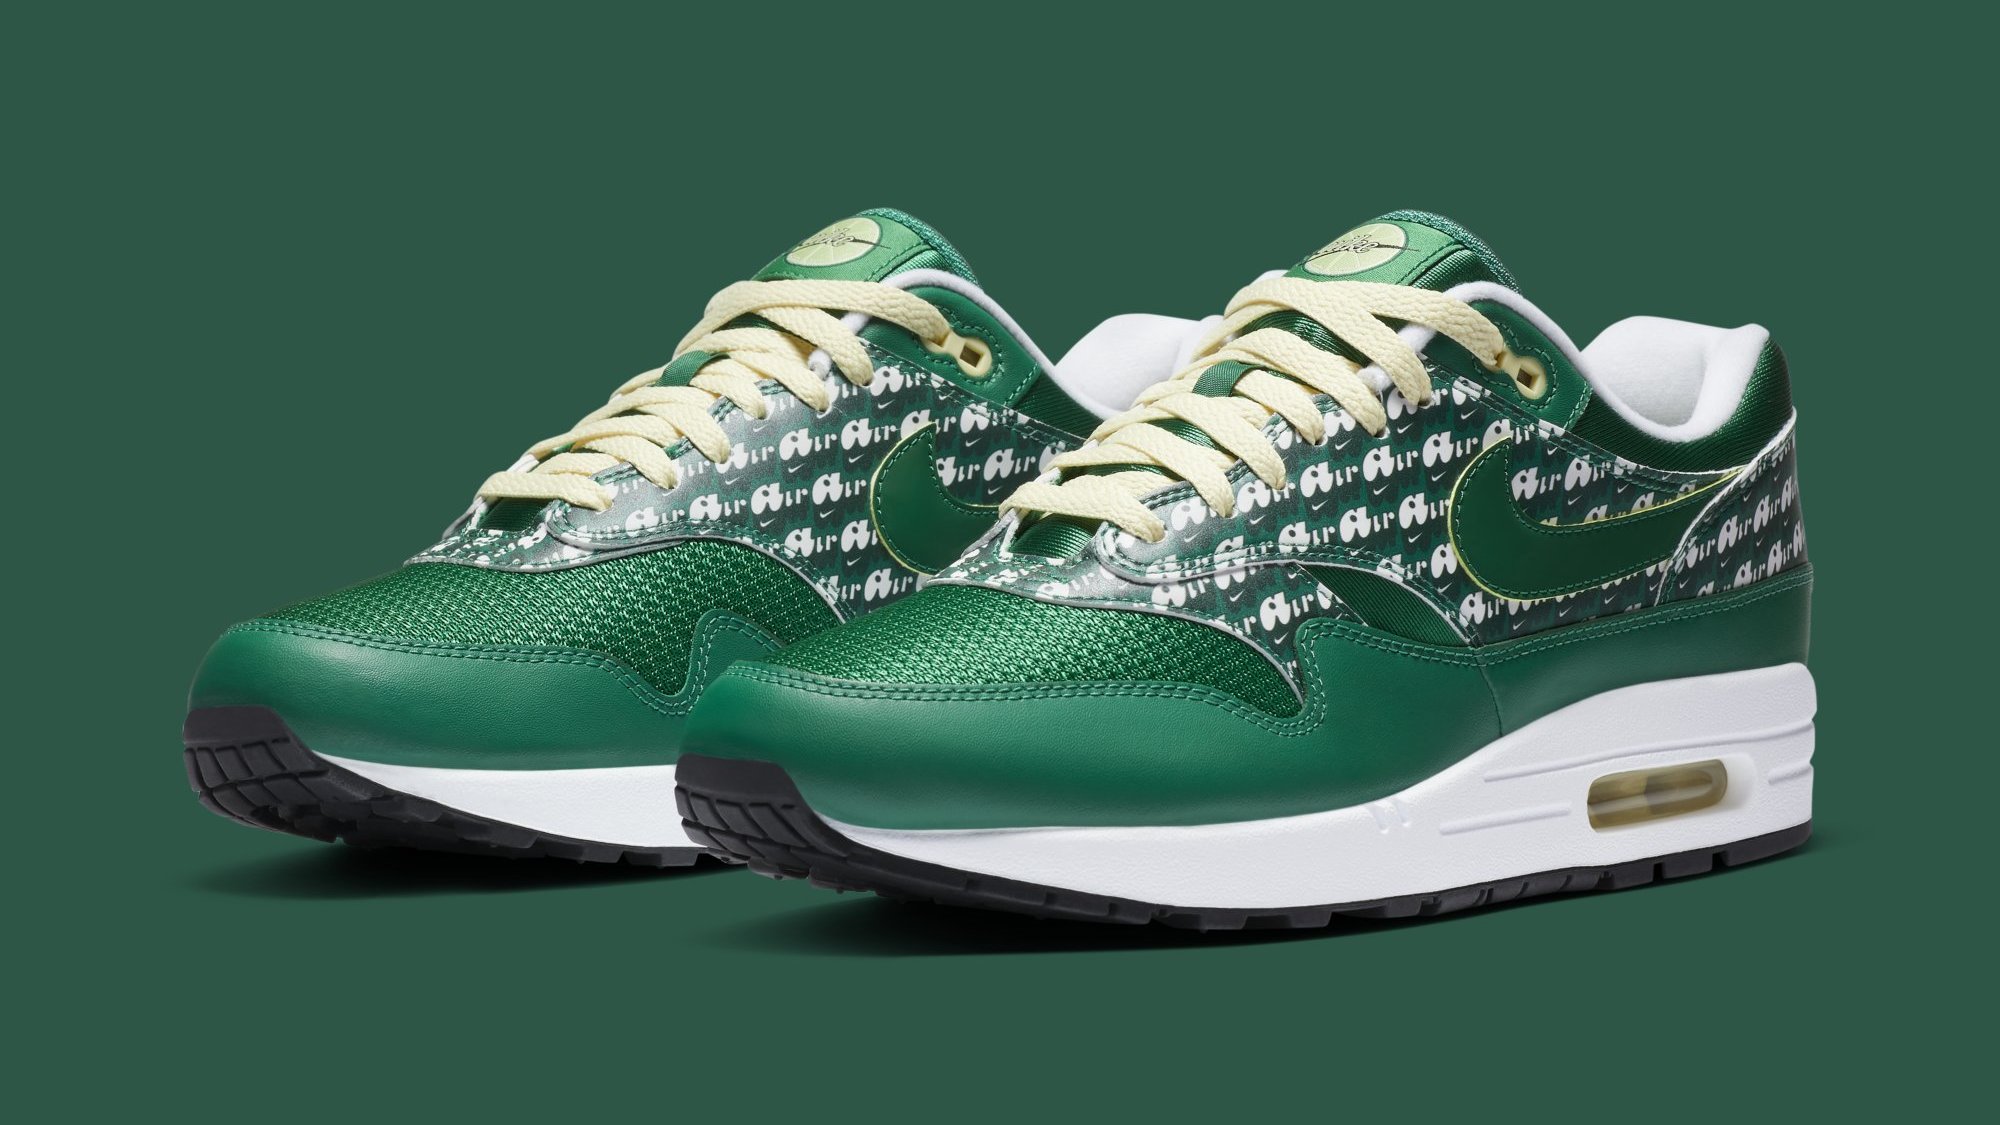 Nike Air Max 1 Powerwall Release Date CJ0609-300 | Sole Collector